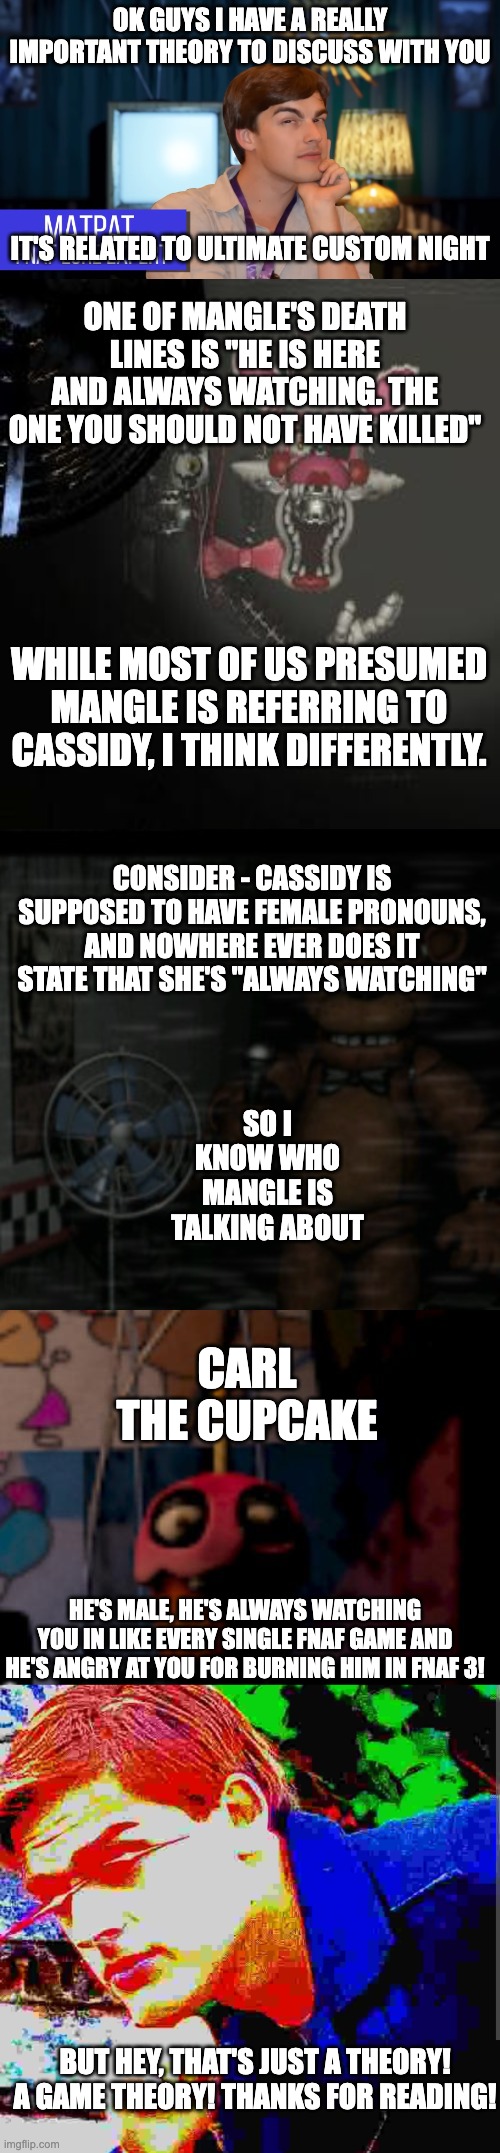 Literally every Game Theory video about FNAF: | OK GUYS I HAVE A REALLY IMPORTANT THEORY TO DISCUSS WITH YOU; IT'S RELATED TO ULTIMATE CUSTOM NIGHT; ONE OF MANGLE'S DEATH LINES IS "HE IS HERE AND ALWAYS WATCHING. THE ONE YOU SHOULD NOT HAVE KILLED"; WHILE MOST OF US PRESUMED MANGLE IS REFERRING TO CASSIDY, I THINK DIFFERENTLY. CONSIDER - CASSIDY IS SUPPOSED TO HAVE FEMALE PRONOUNS, AND NOWHERE EVER DOES IT STATE THAT SHE'S "ALWAYS WATCHING"; SO I KNOW WHO MANGLE IS TALKING ABOUT; CARL THE CUPCAKE; HE'S MALE, HE'S ALWAYS WATCHING YOU IN LIKE EVERY SINGLE FNAF GAME AND HE'S ANGRY AT YOU FOR BURNING HIM IN FNAF 3! BUT HEY, THAT'S JUST A THEORY! A GAME THEORY! THANKS FOR READING! | image tagged in matpat fnaf lore expert,mangle,bored freddy,five nights at freddy's fnaf carl the cupcake | made w/ Imgflip meme maker